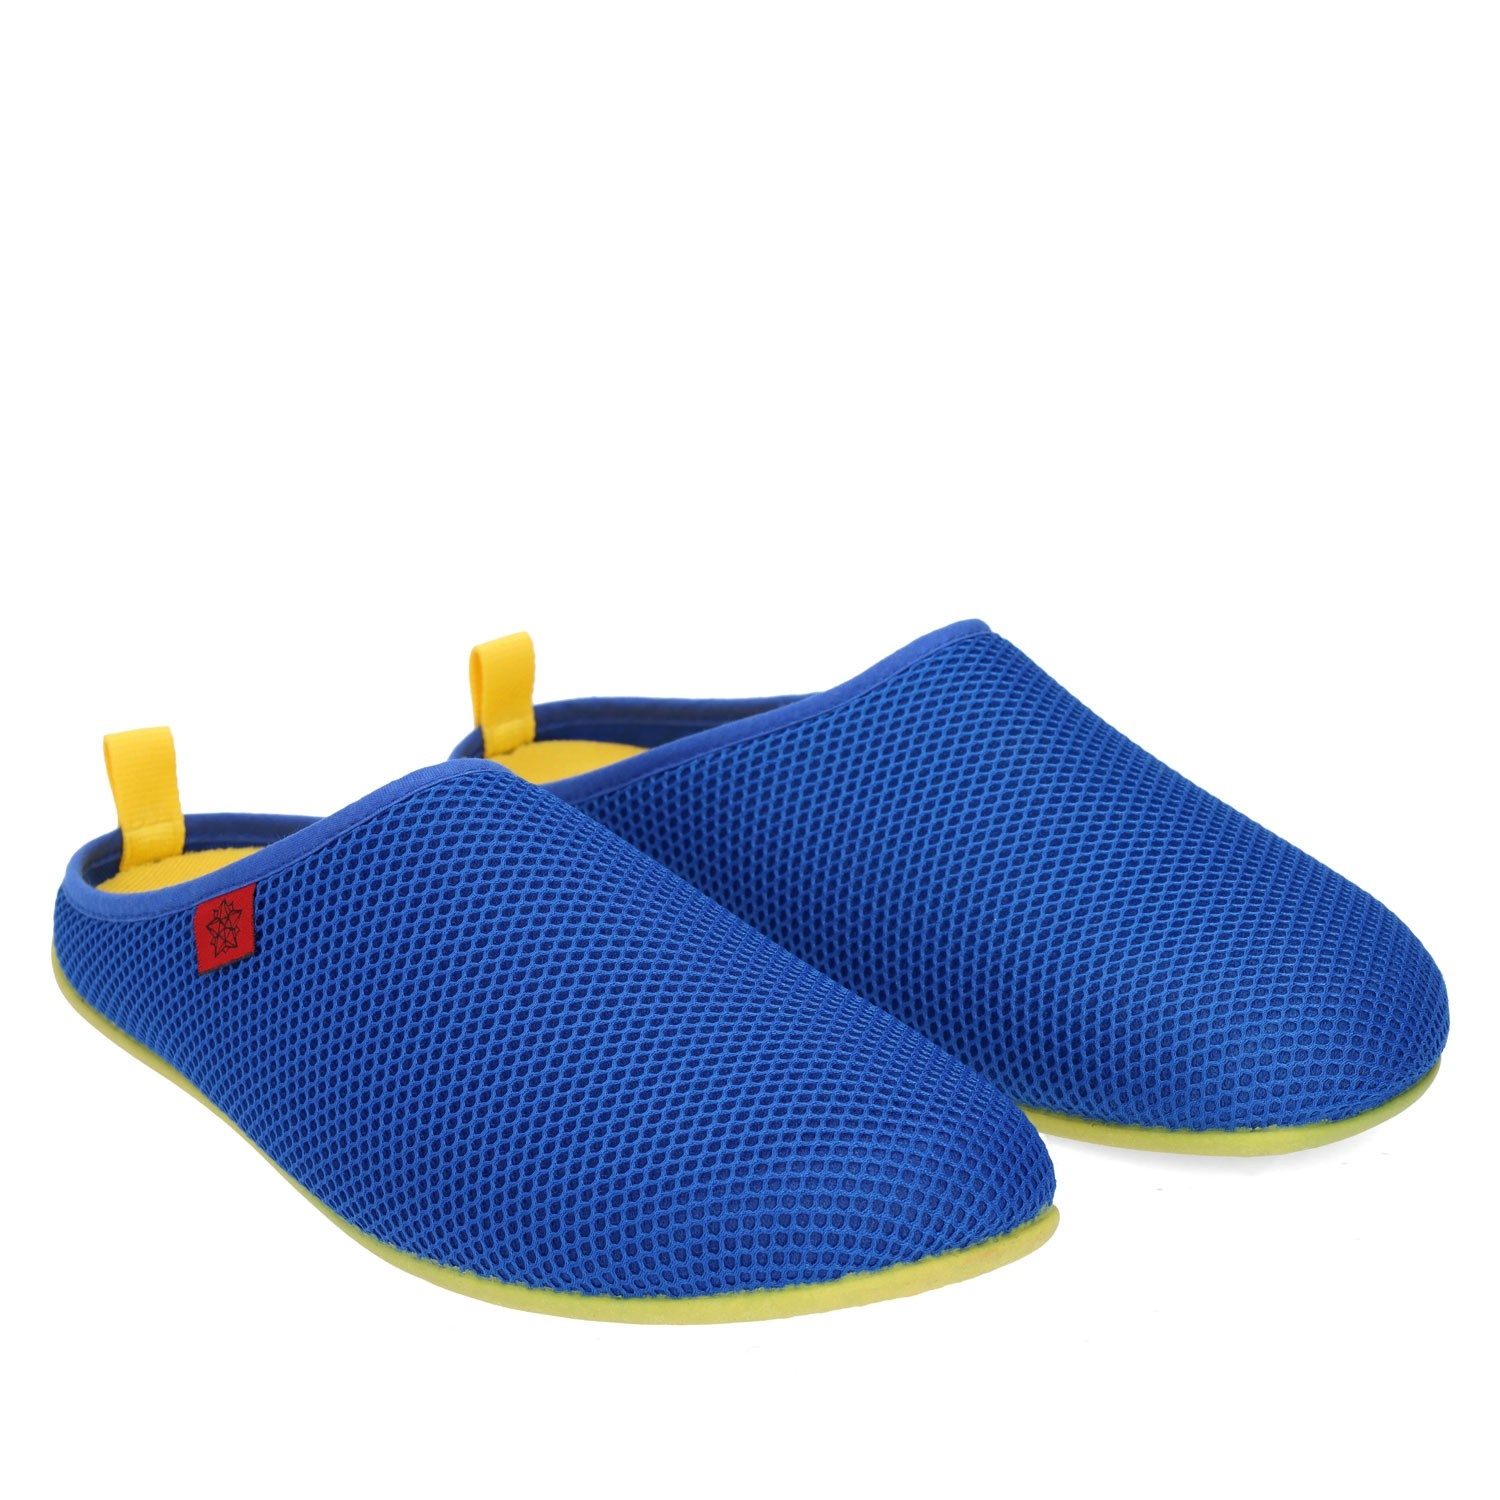 Buy Home Slippers - Andres Machado Official Store